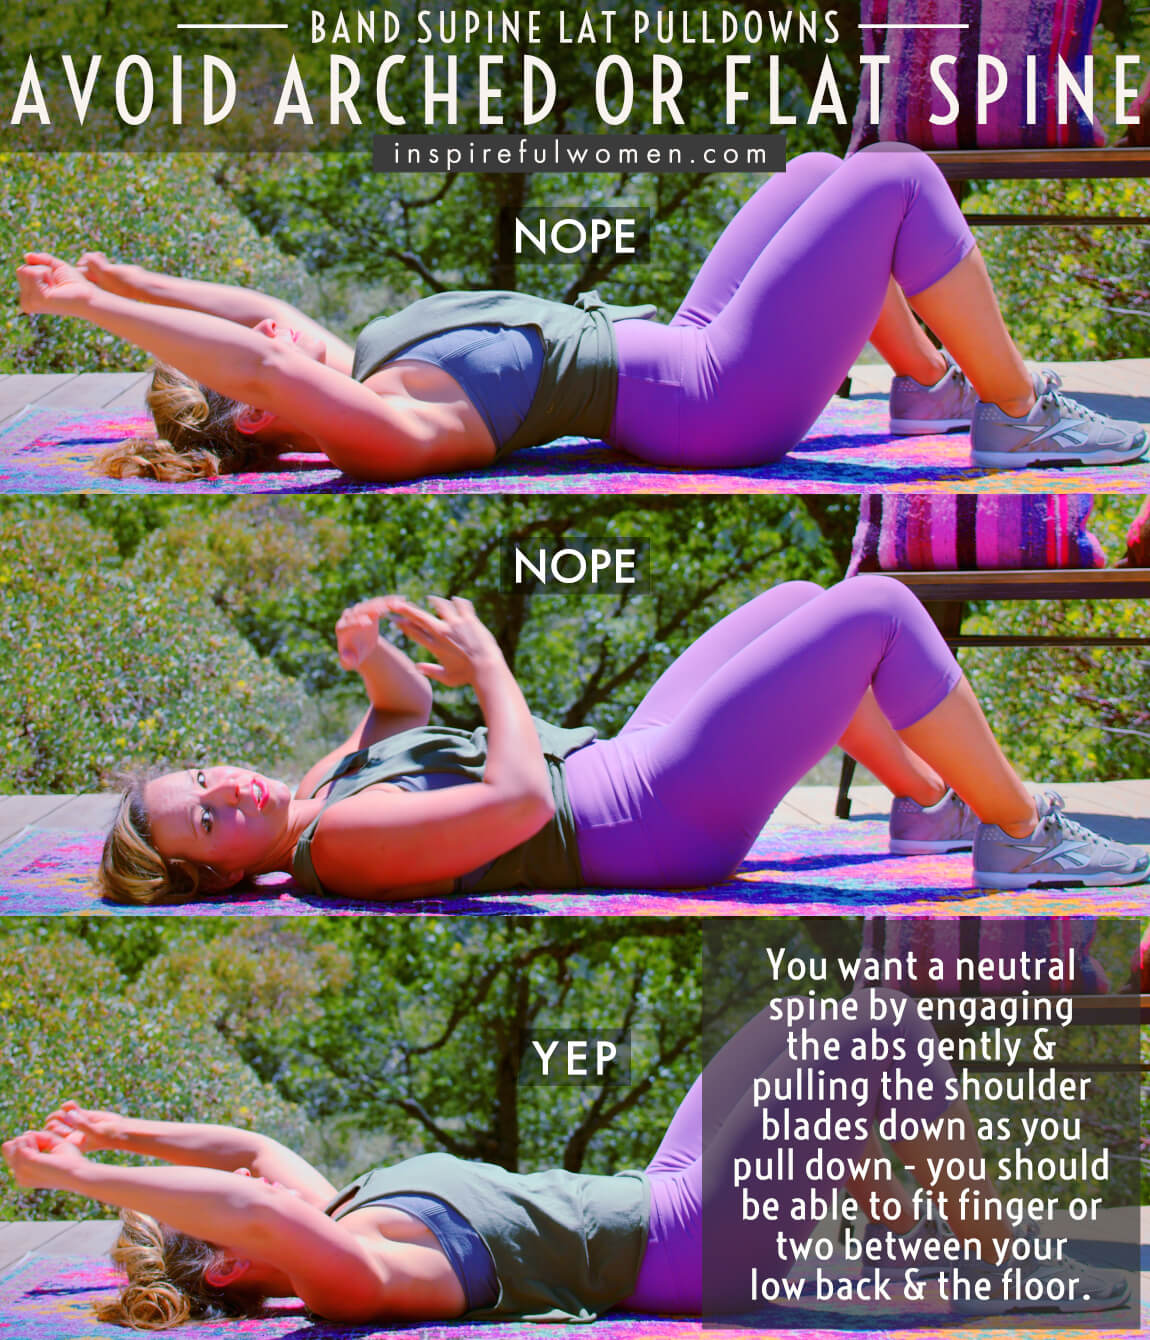 avoid-arched-or-flat-spine-supine-lying-banded-lat-pulldowns-home-exercise-proper-form